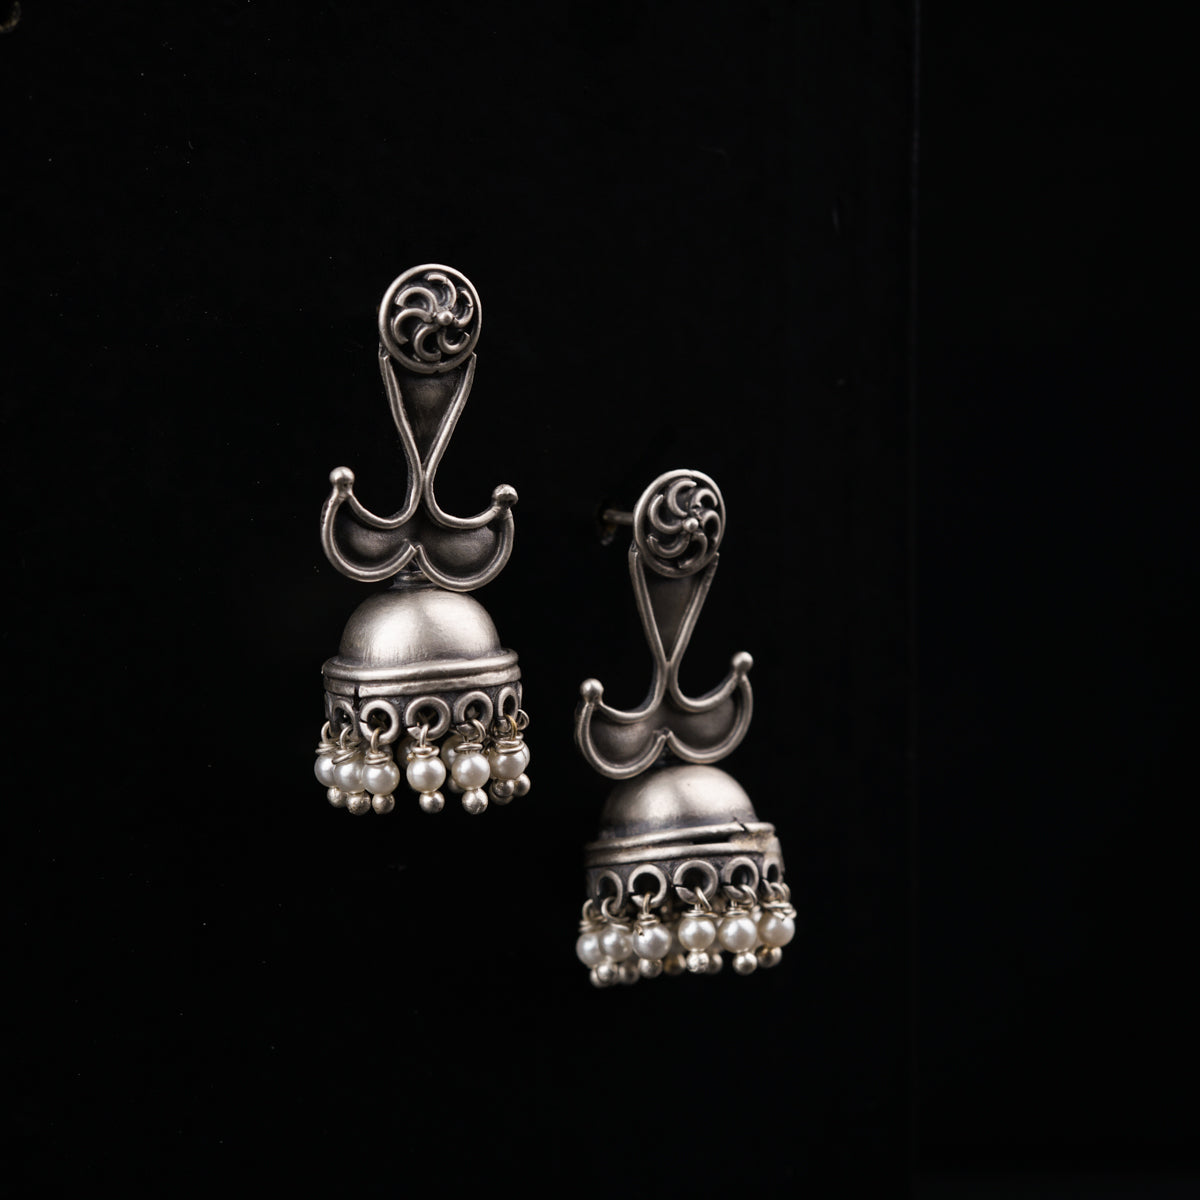 a pair of silver bells with pearls on them